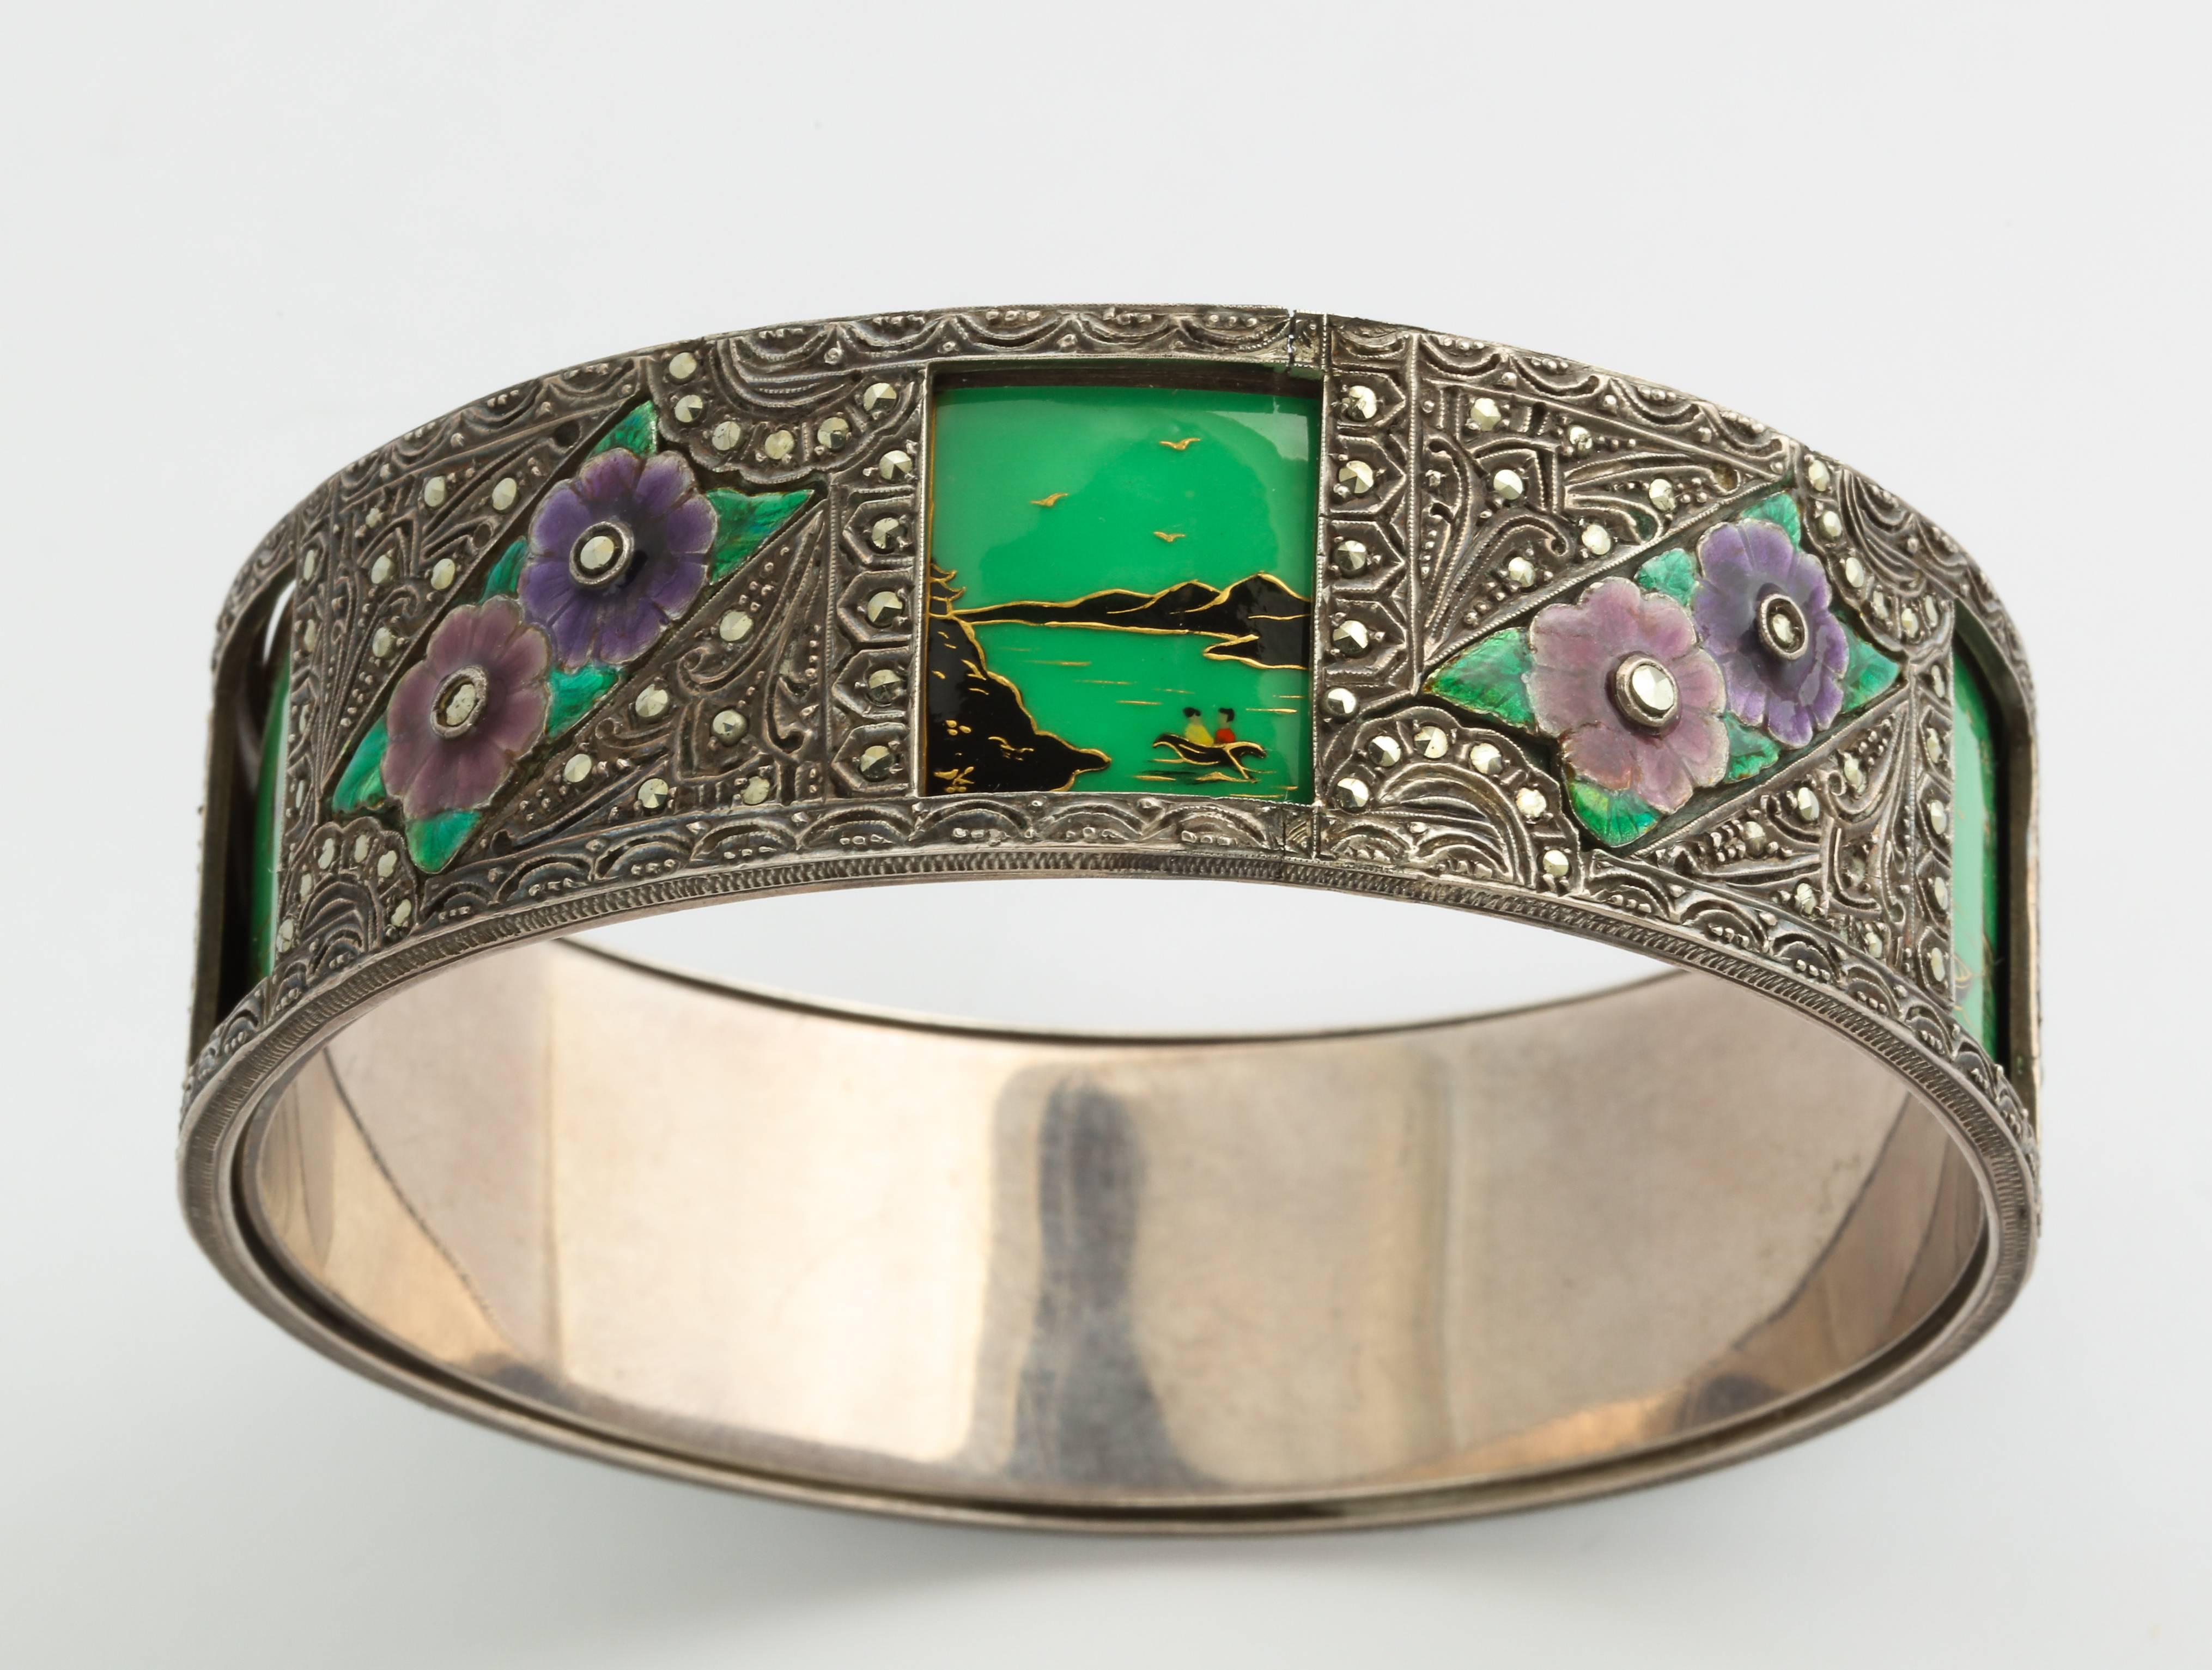 A very special Art Deco bracelet of silver, marcasite and enamel, made to wear somewhere between wrist and elbow, with a unique mechanism that lets you revolve the outer band of cut out windows, over a band of enameled scenes in color choices of